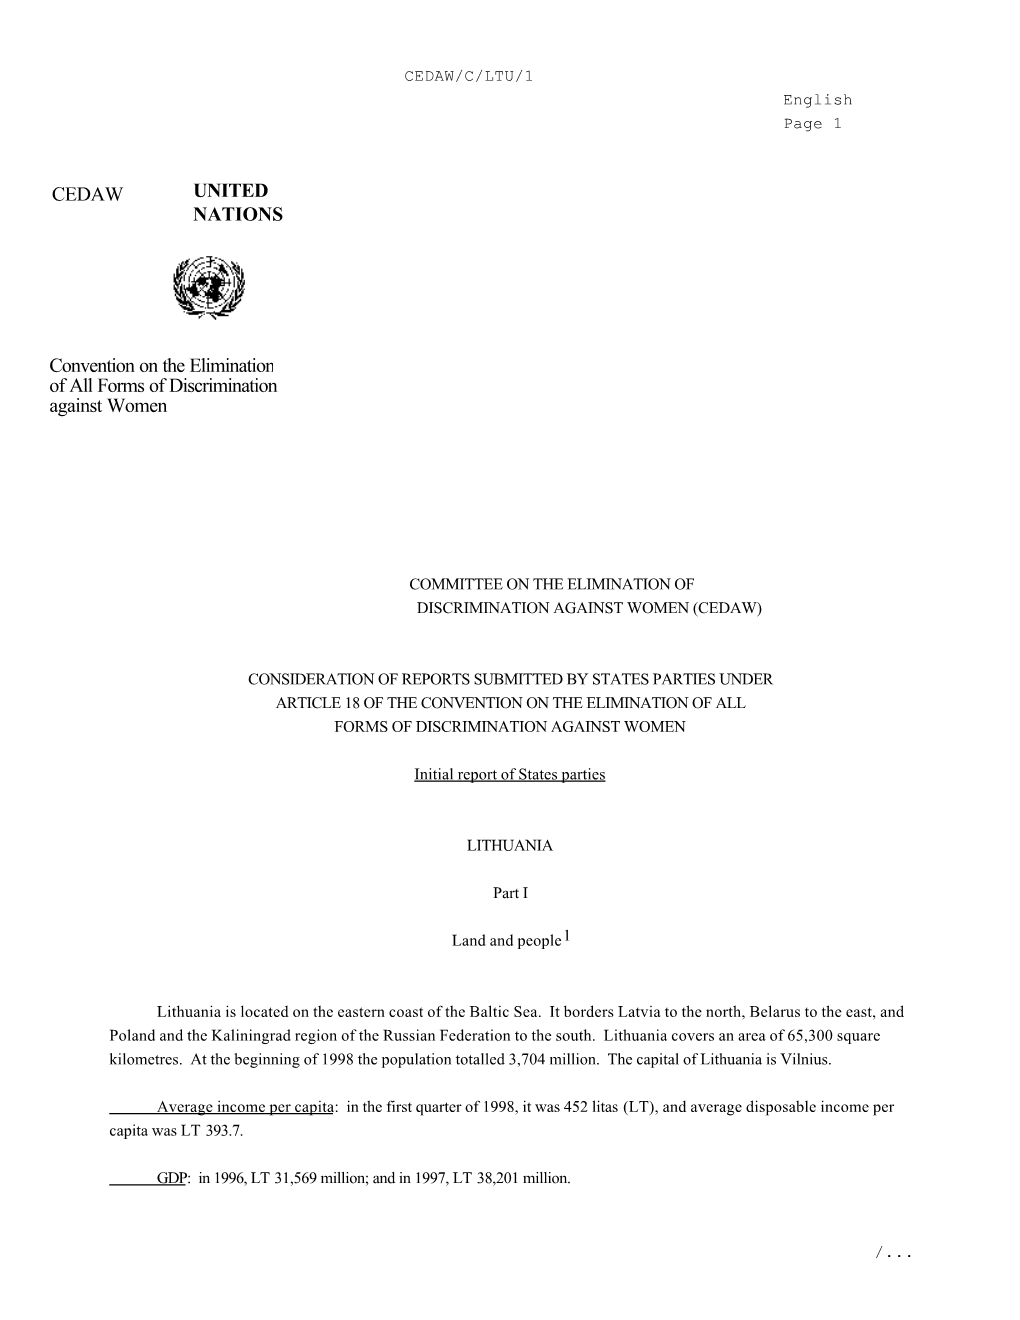 UNITED NATIONS CEDAW Convention on the Elimination of All